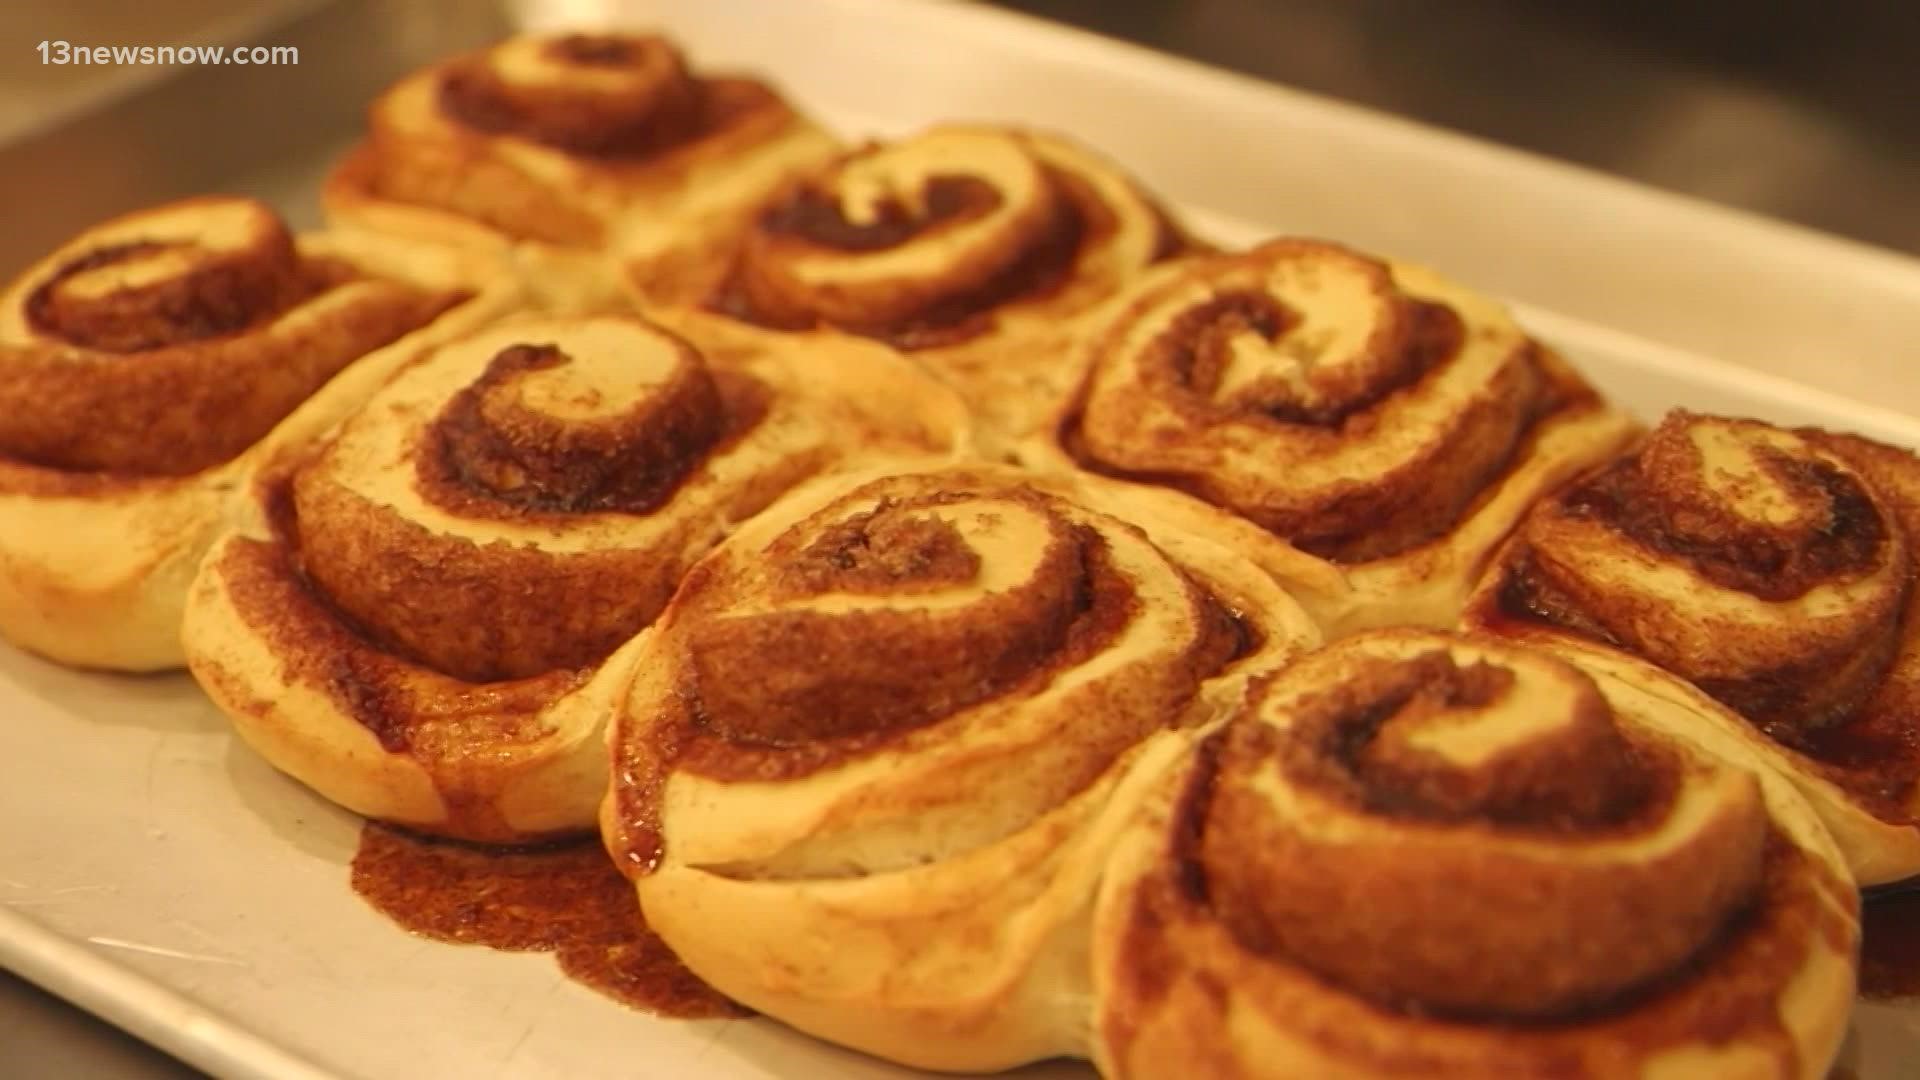 The cinnamon rolls come with a long list of possible toppings -- and the restaurant is vegan, which opens up the treats to people with egg and dairy allergies.